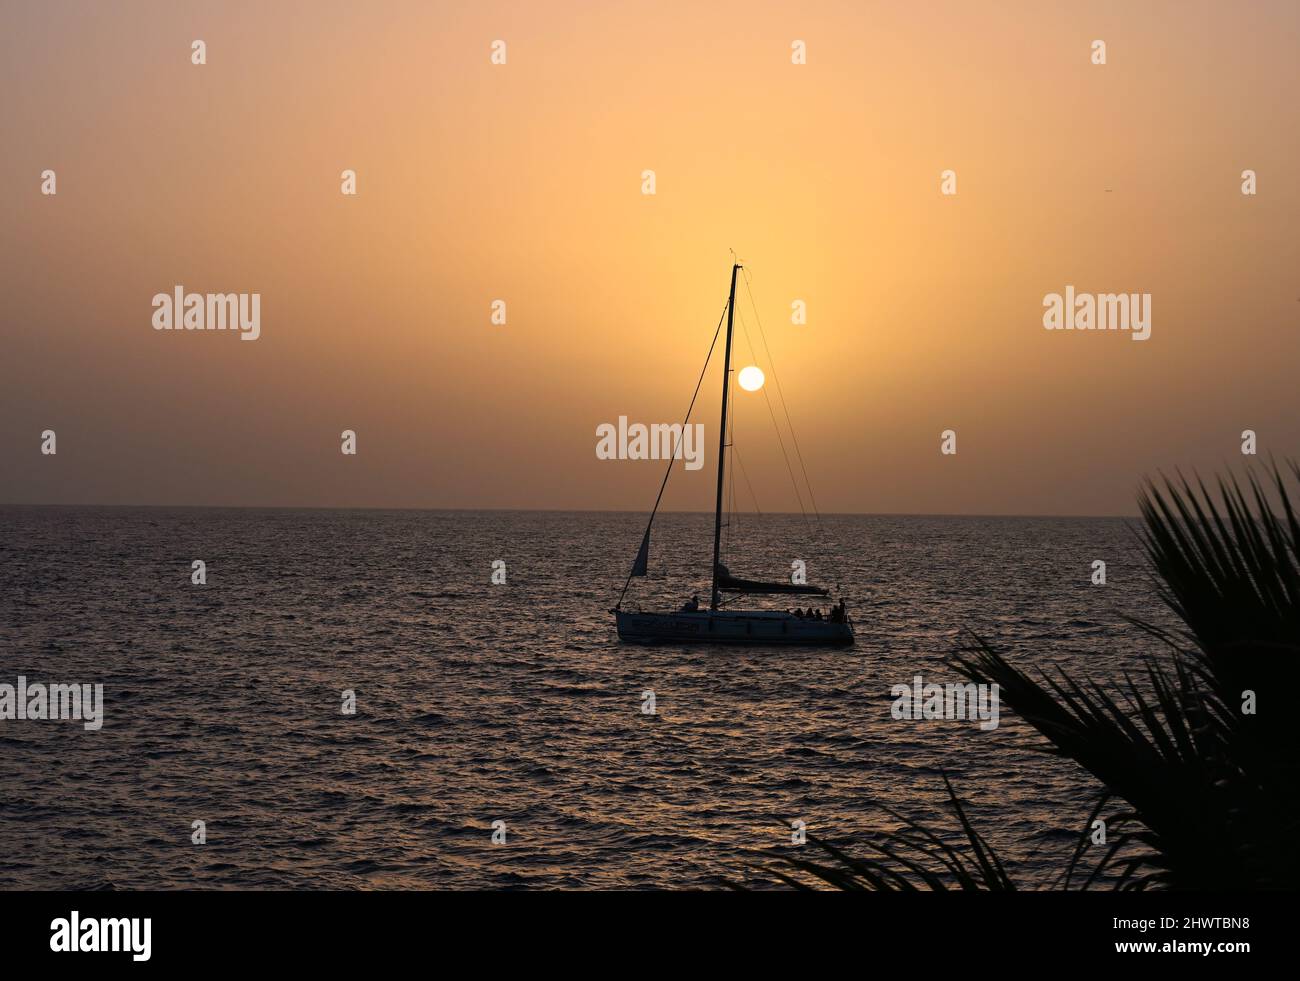 A tranquil distant sunset on a warm February Day over the Atlantic Ocean at dusk with a sail boat crossing the horizon Stock Photo